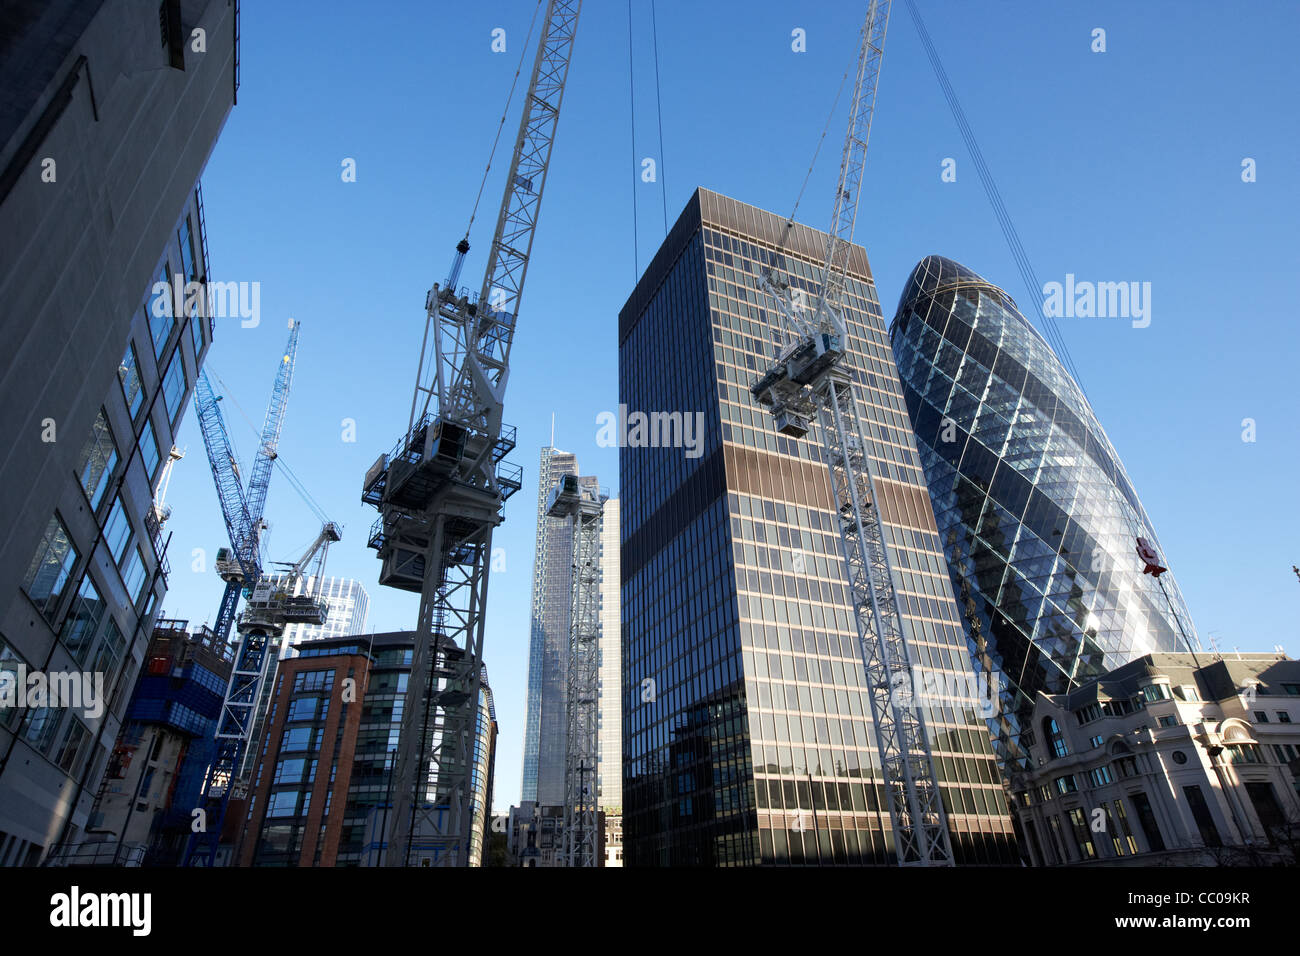 122 leadenhall street building under construction site in the city of London with the gherkin and st helen's tower Stock Photo